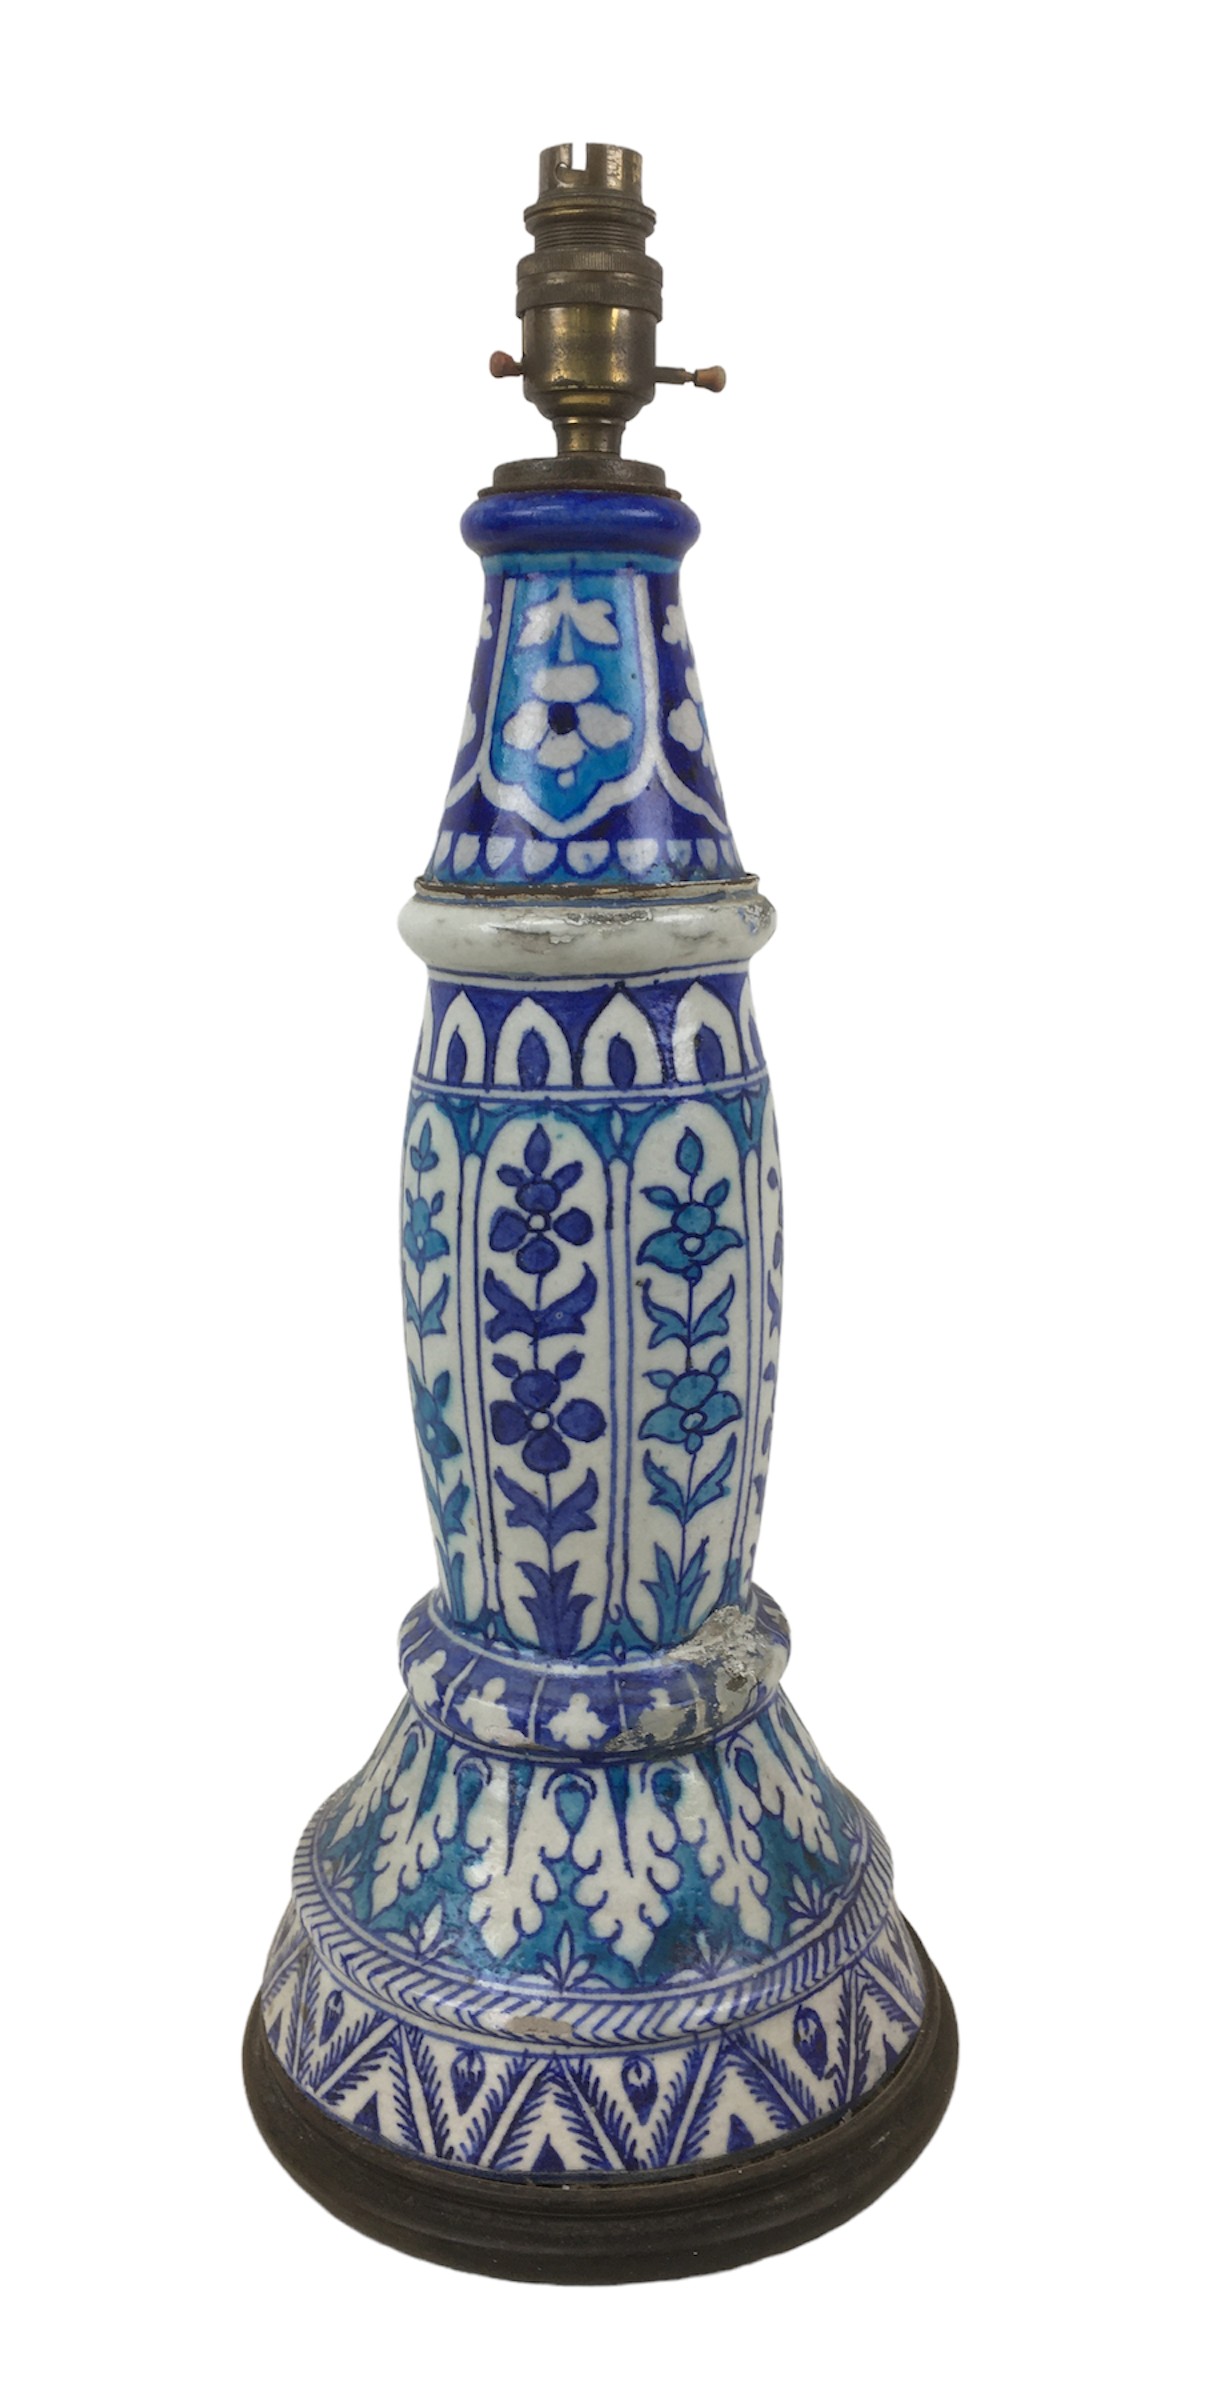 A Persian / Continental ceramic lamp base, wired for electricity in the early 20th century,